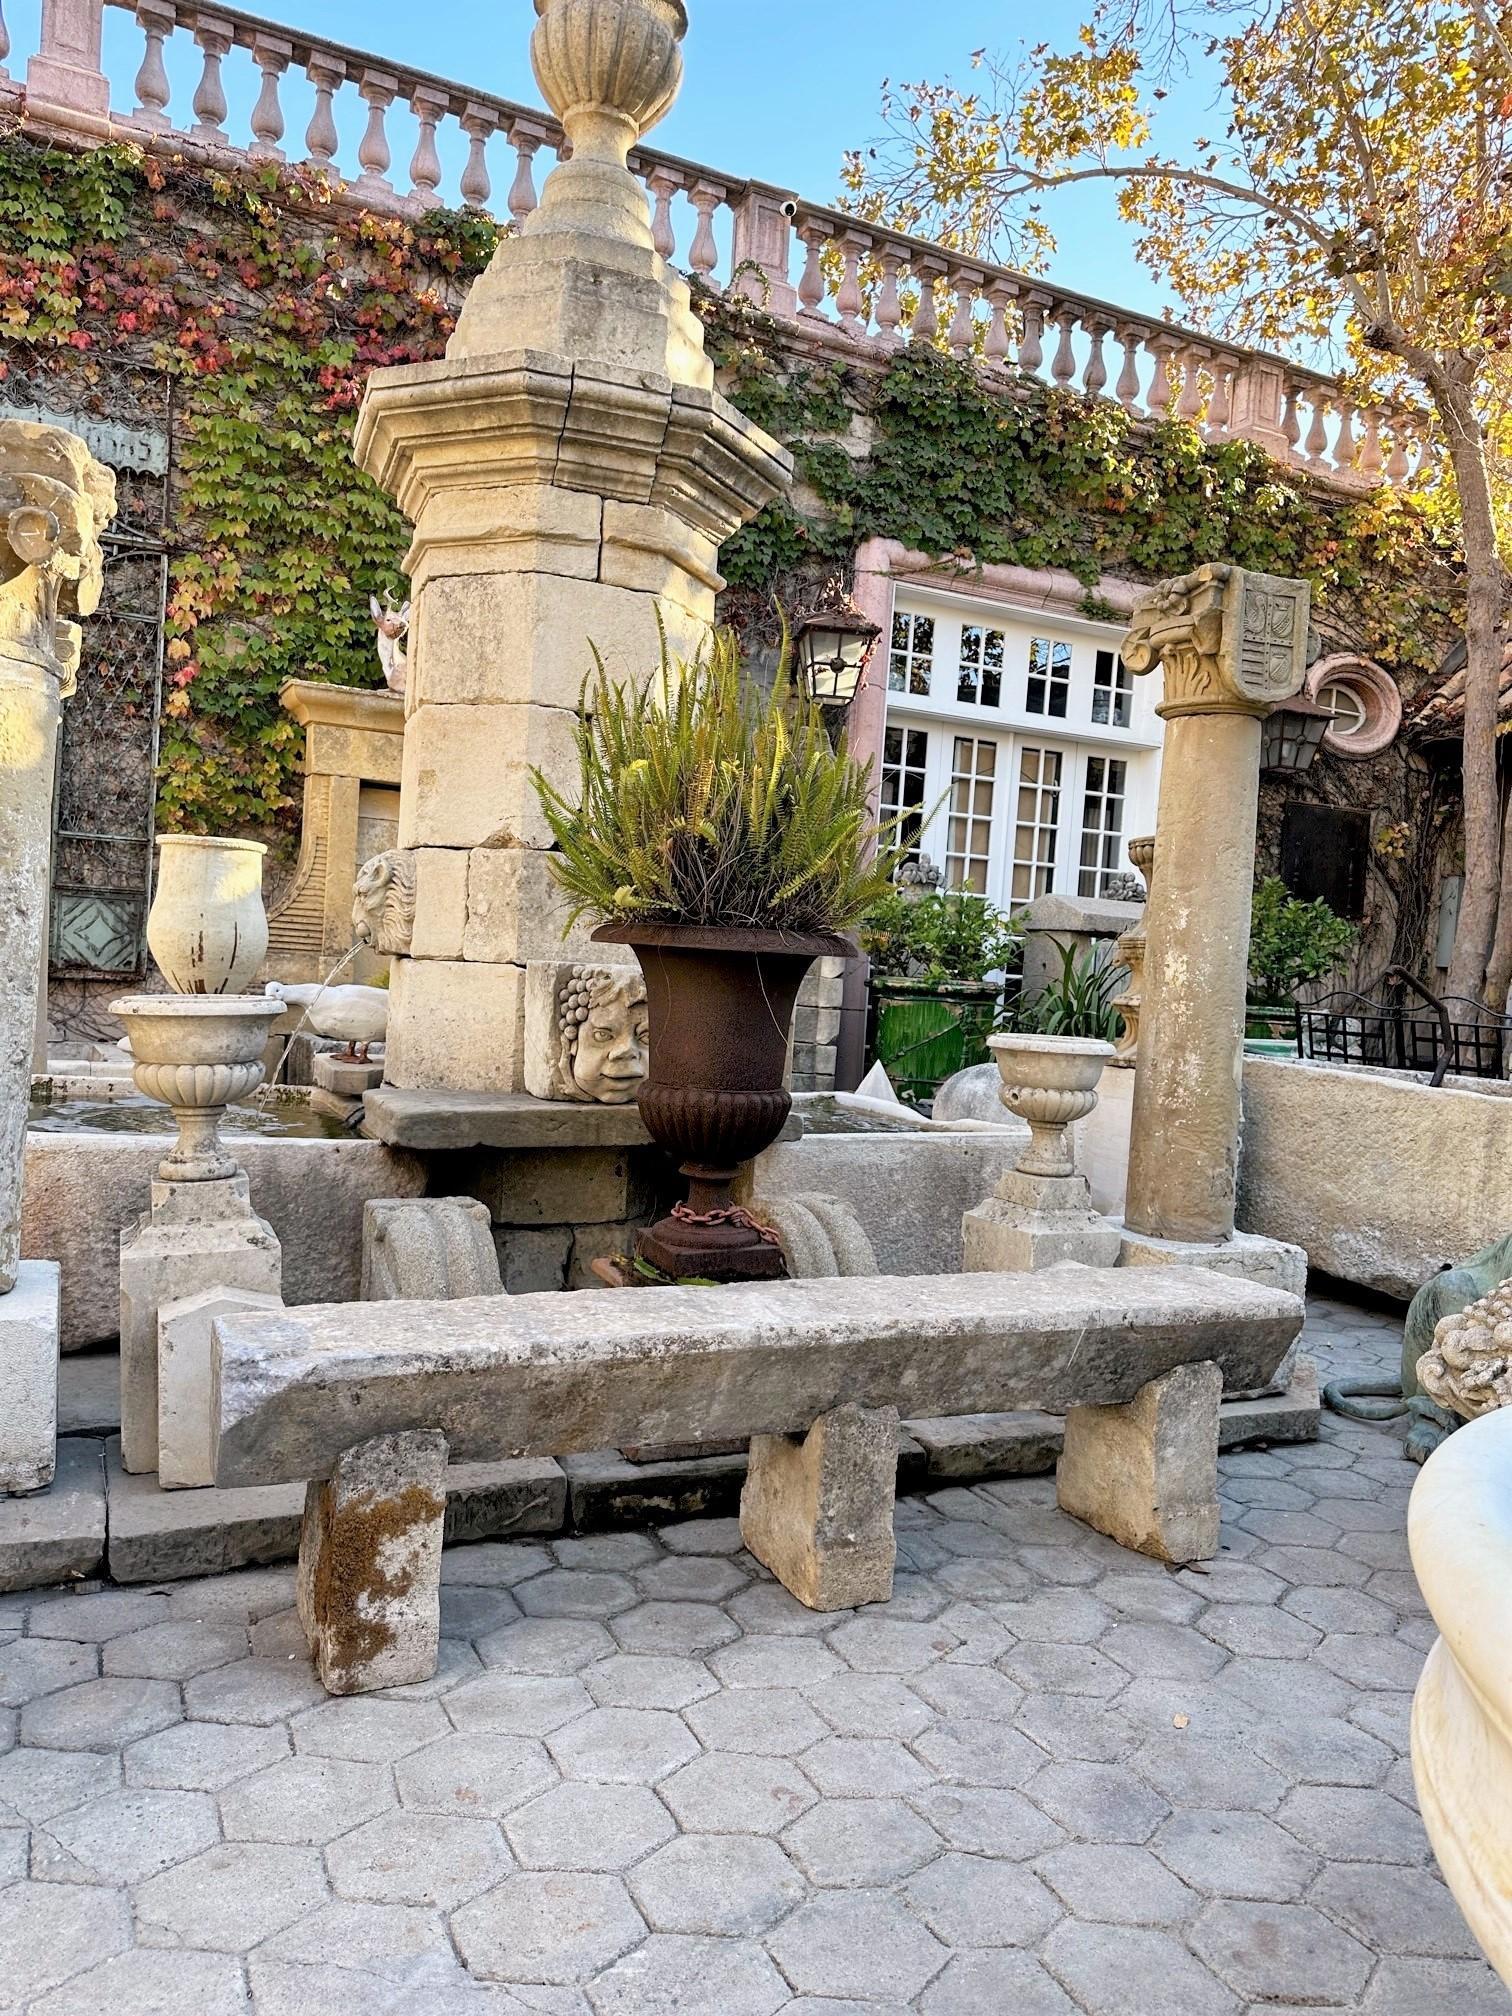 Hand carved stone rustic park garden bench seat antique indoor outdoor LA CA. Very long 18th century hand carved elements garden Stone bench. This rustic beauty is a rare piece indeed A large beautiful garden bench simple lines that works in an